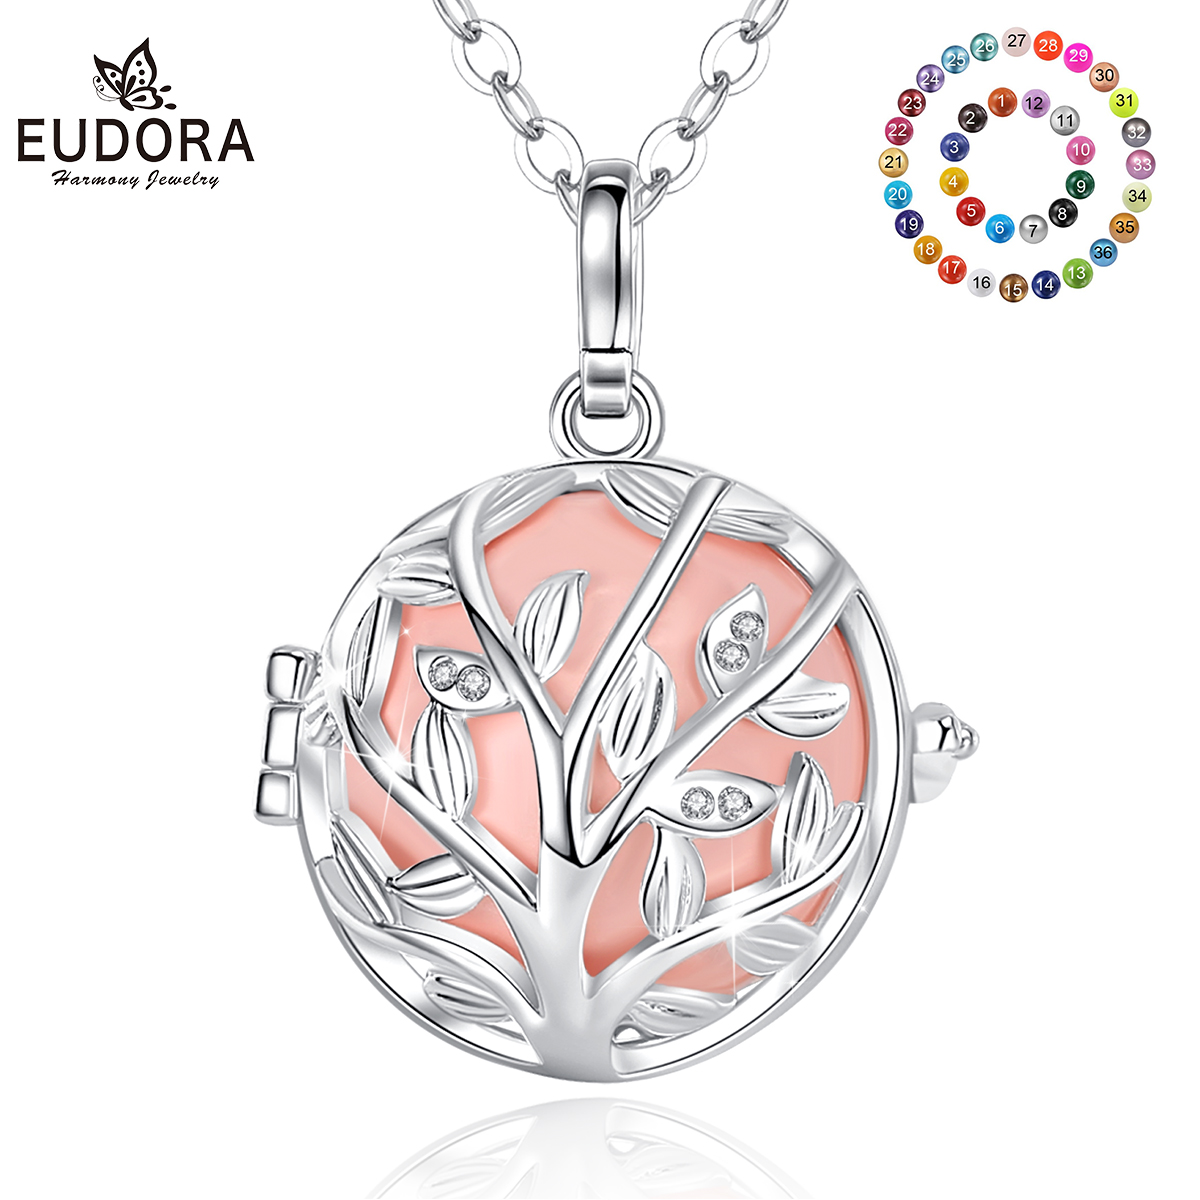 Eudora 20mm fashion Crystal Tree Cage Harmony Ball Chime Bell Pendant Angel Caller Bola Necklace for Baby Pregnancy Jewelry K168 1